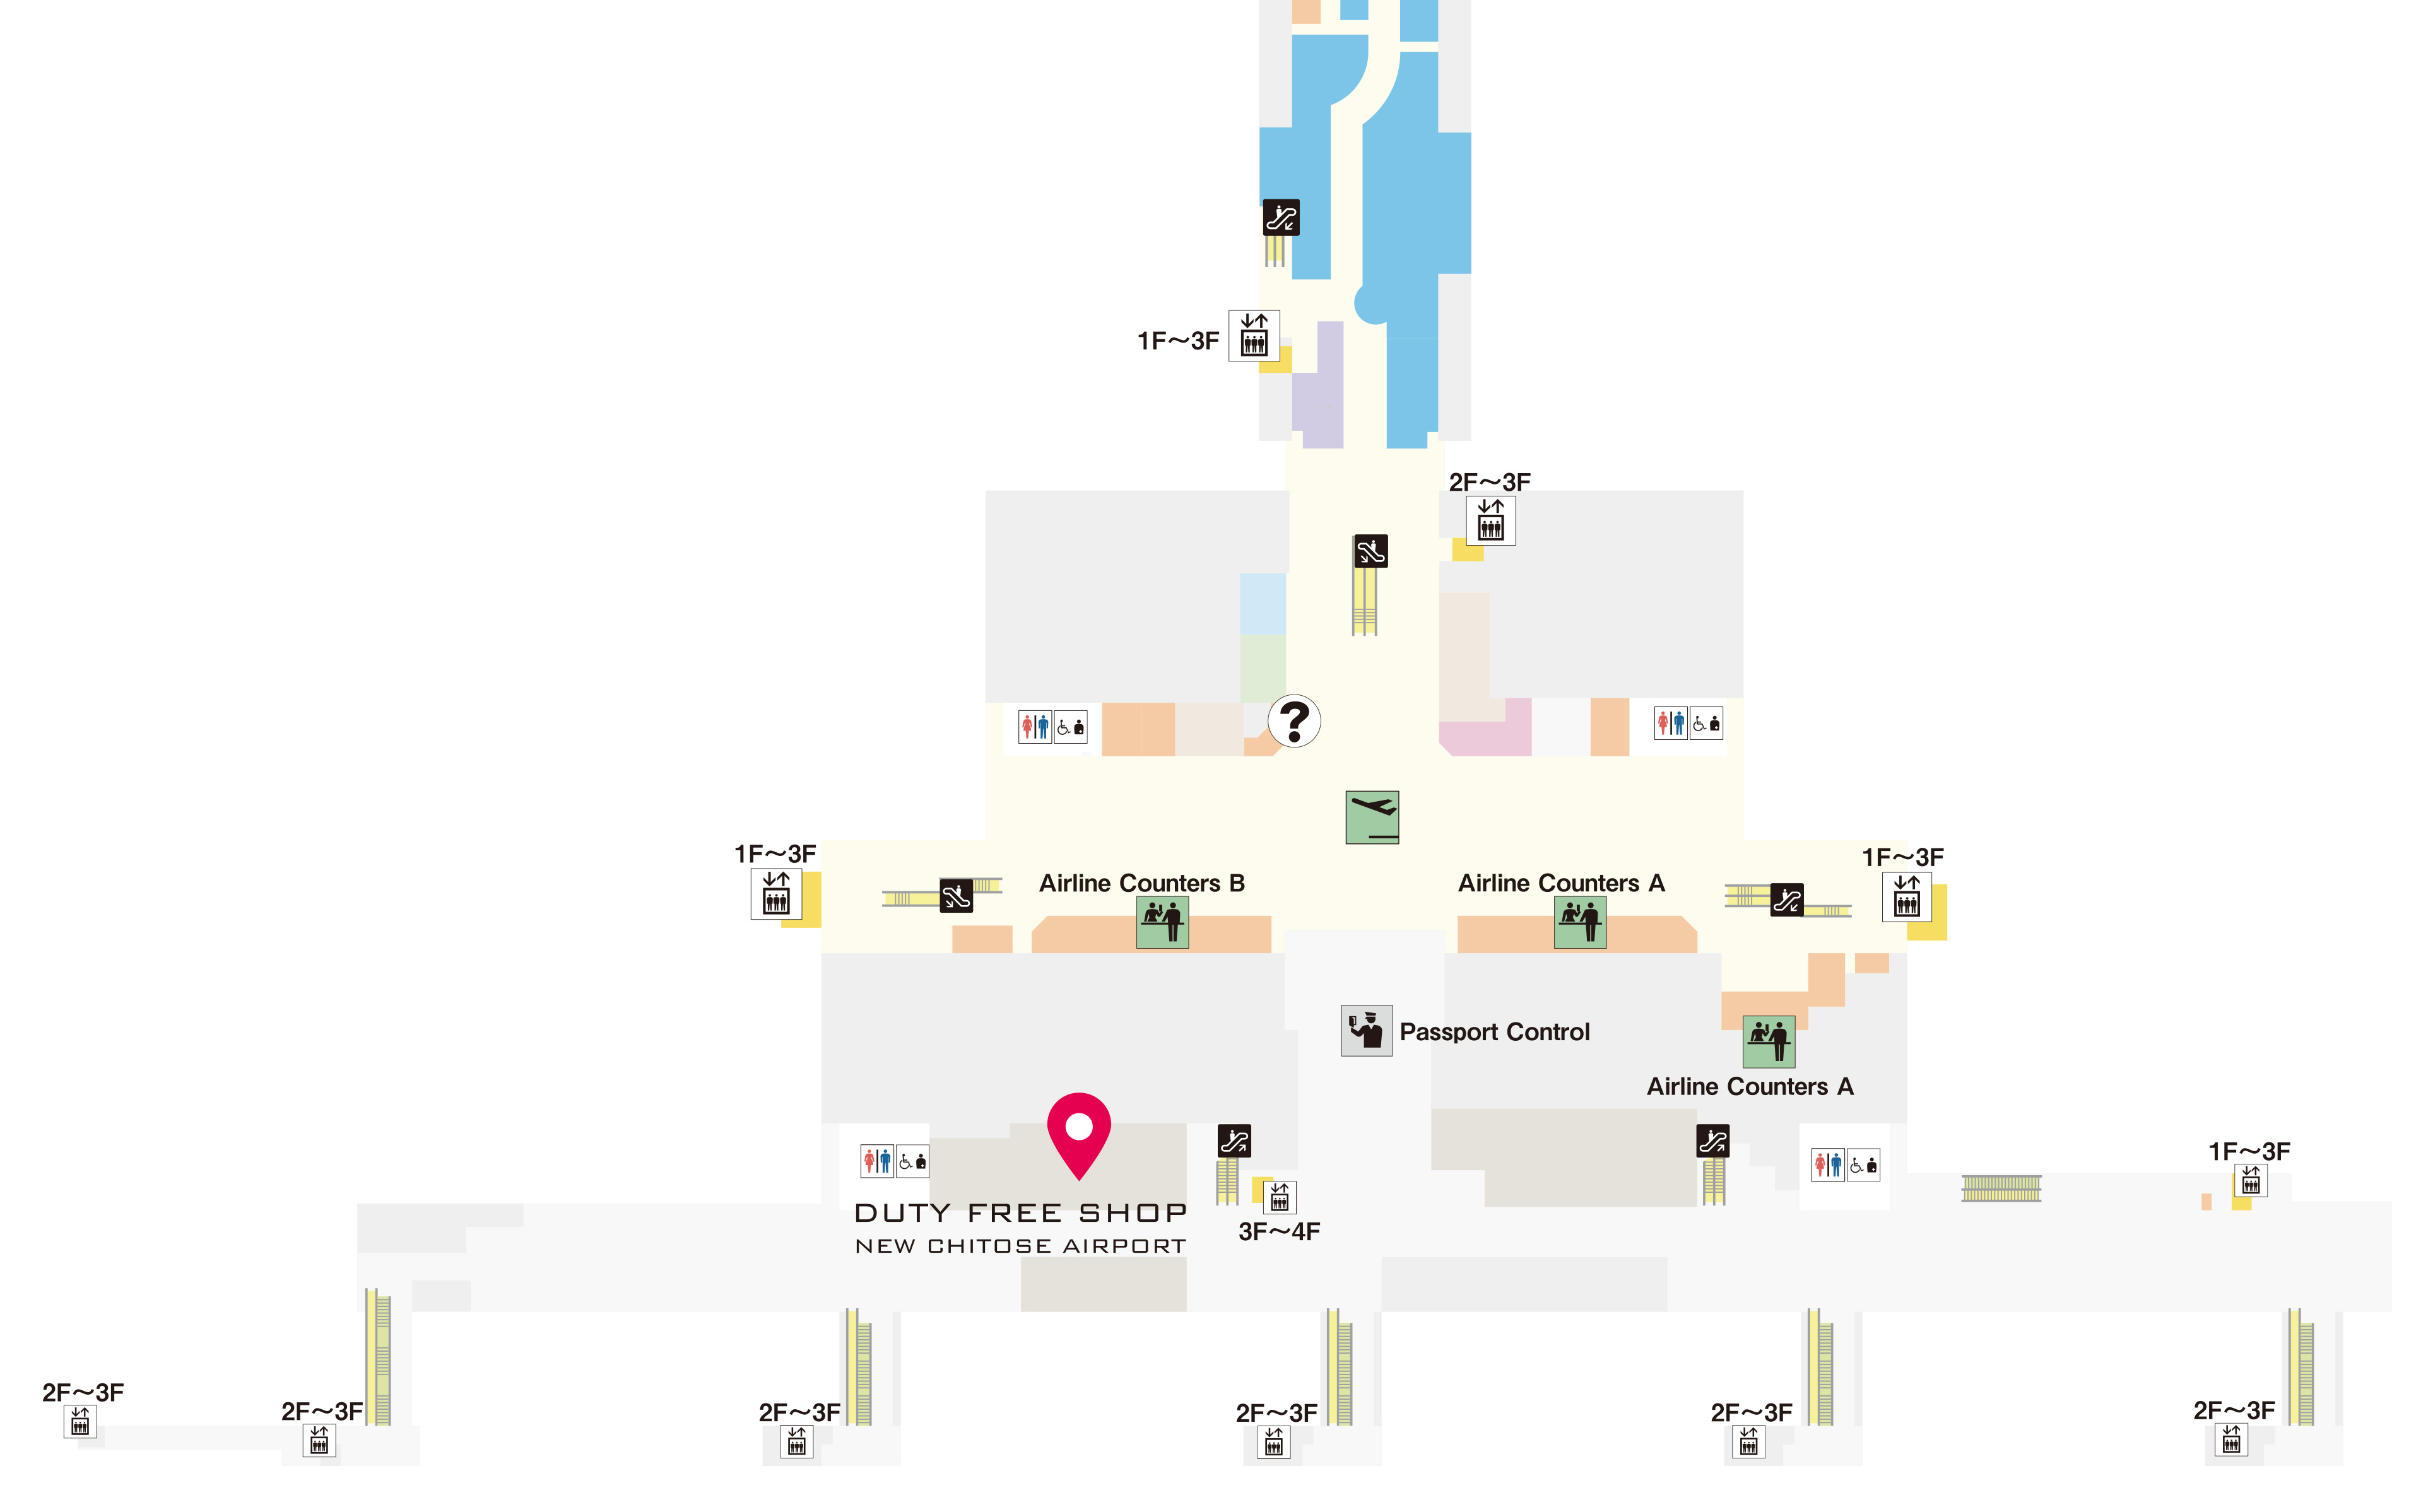 No. 1 Shop Map of the airport